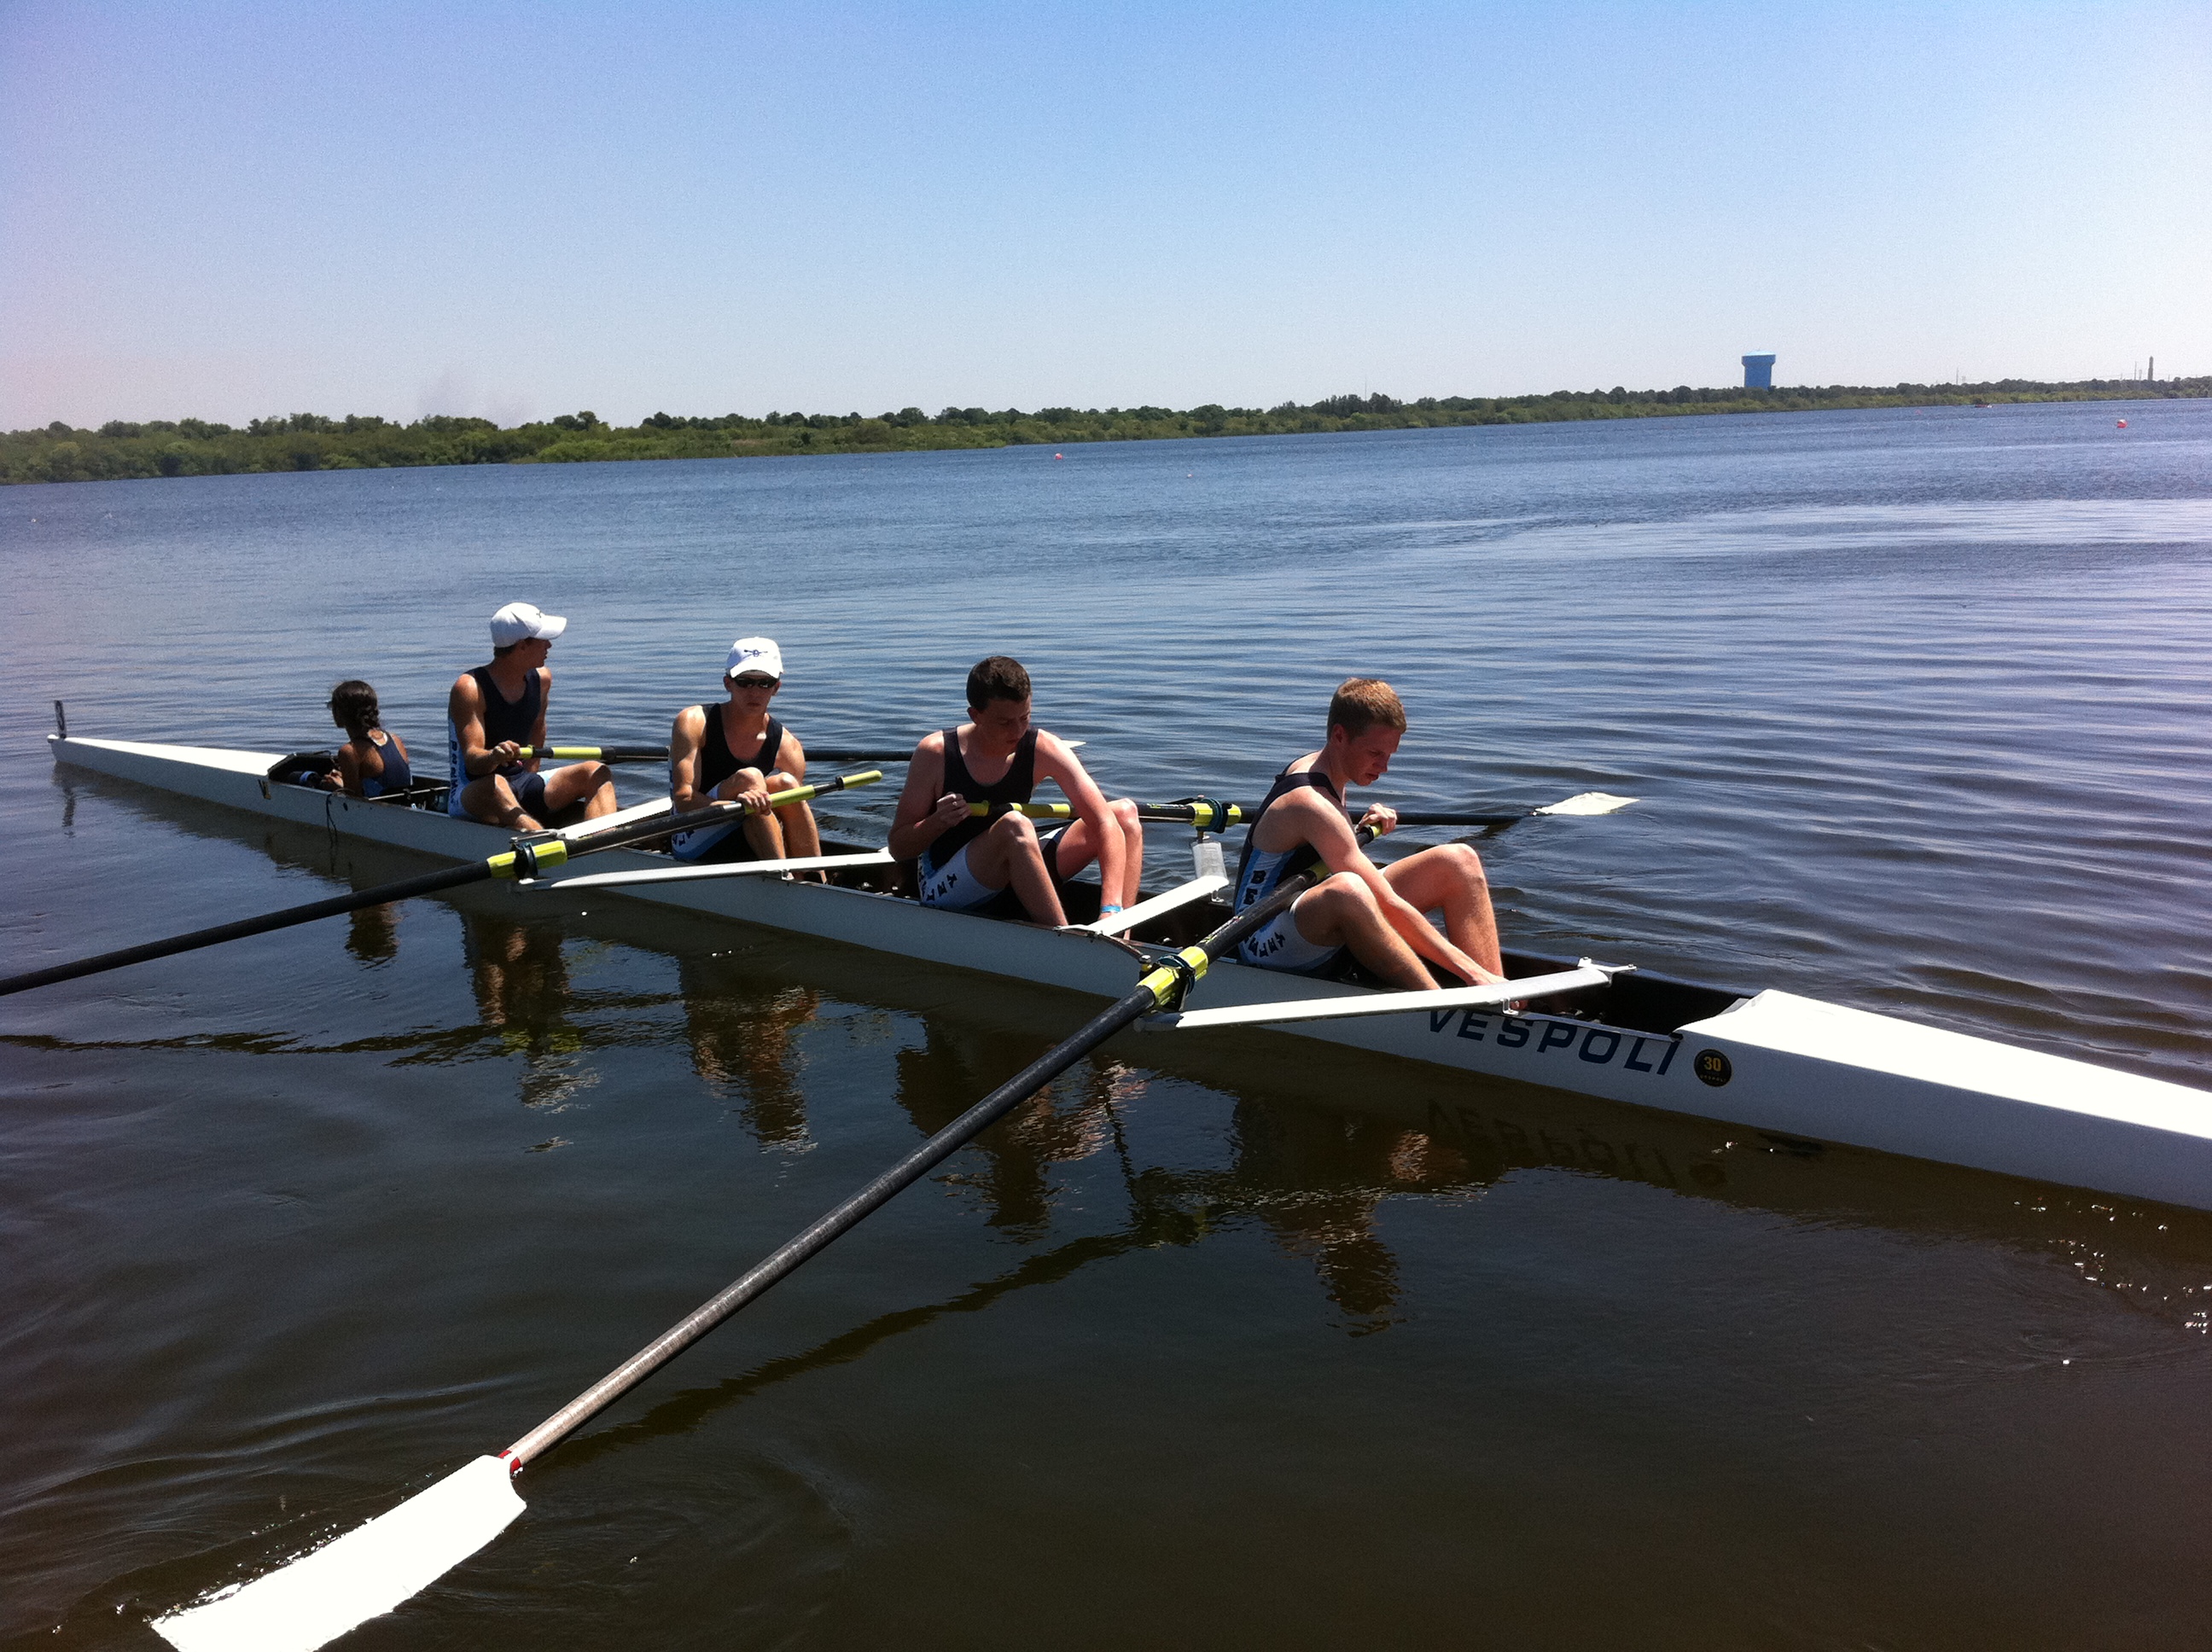 Heart Rate in Rowers and Non-Rowers